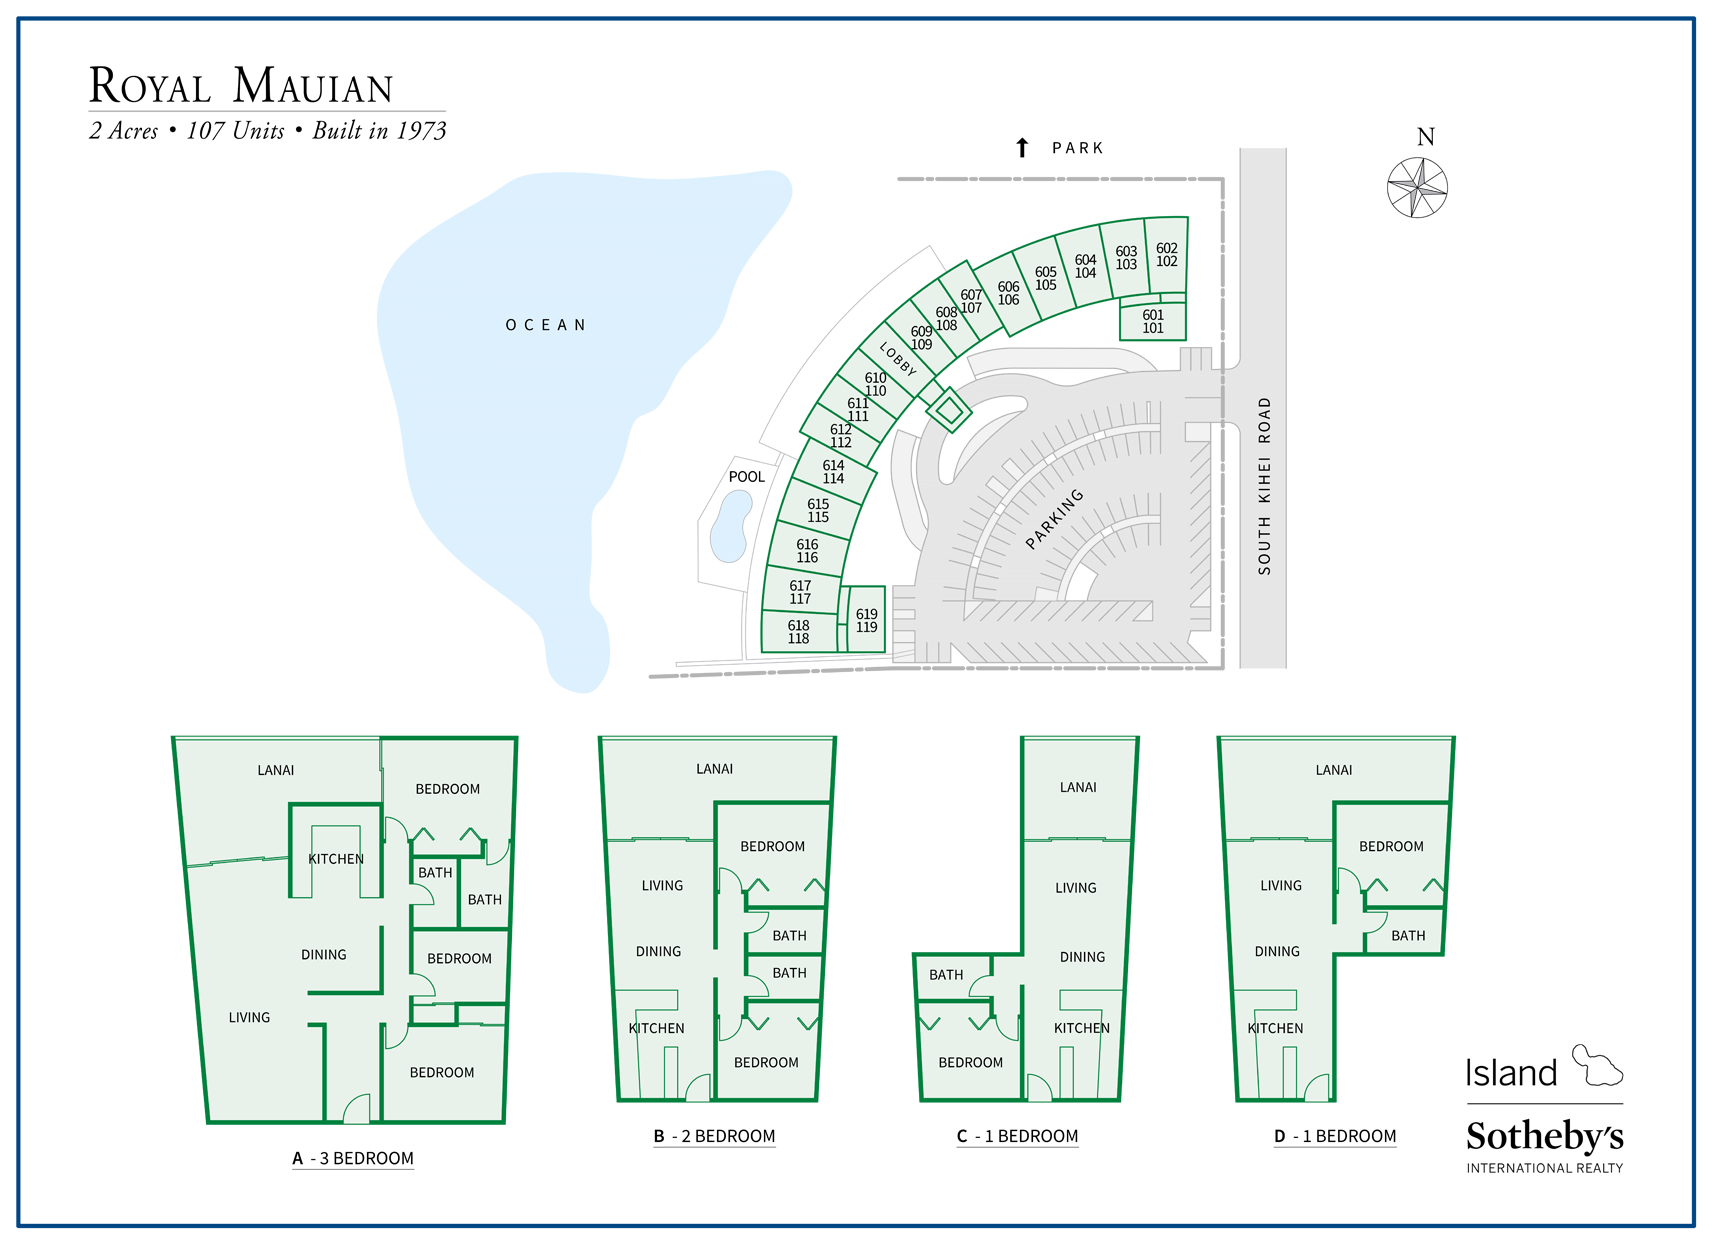 royal mauian floor plans and map